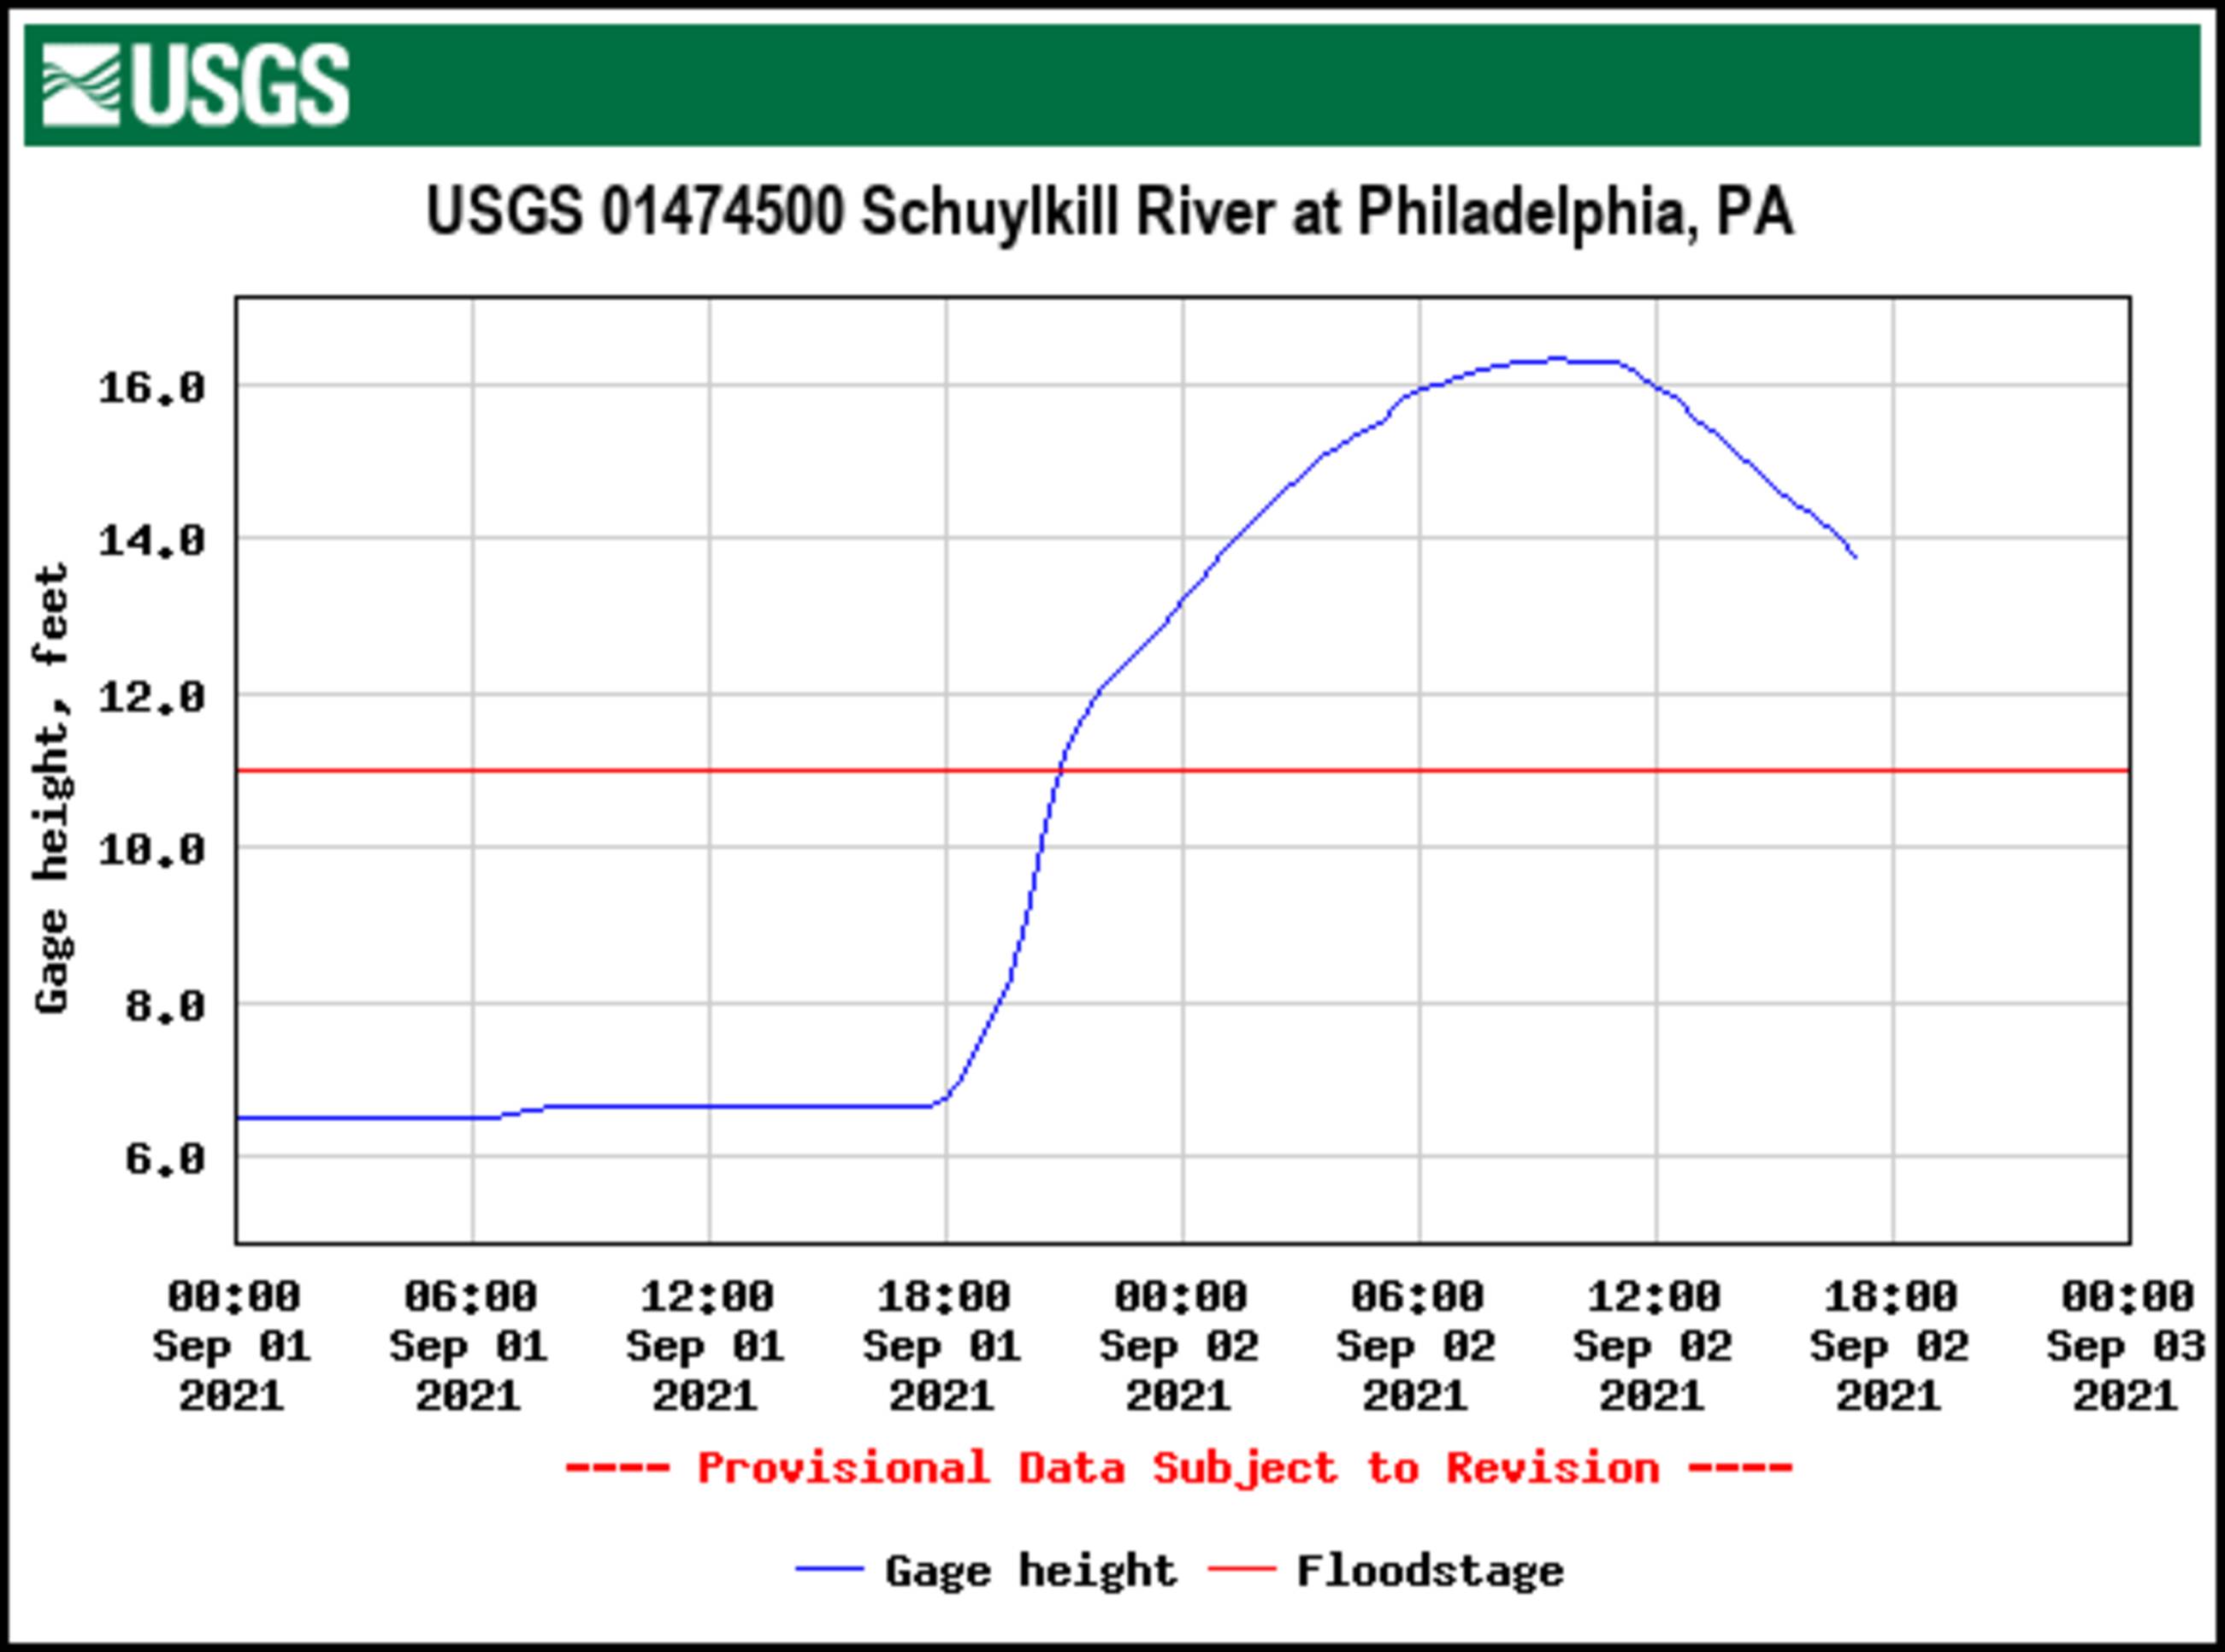 USGS flood level graph from the measuring station across from Boat House Row. Peaked at 16.35 feet on September 2, 2021 at 9:30am. This is the second highest river level ever measured. The higest was 17.00 feet on October 4, 1869.